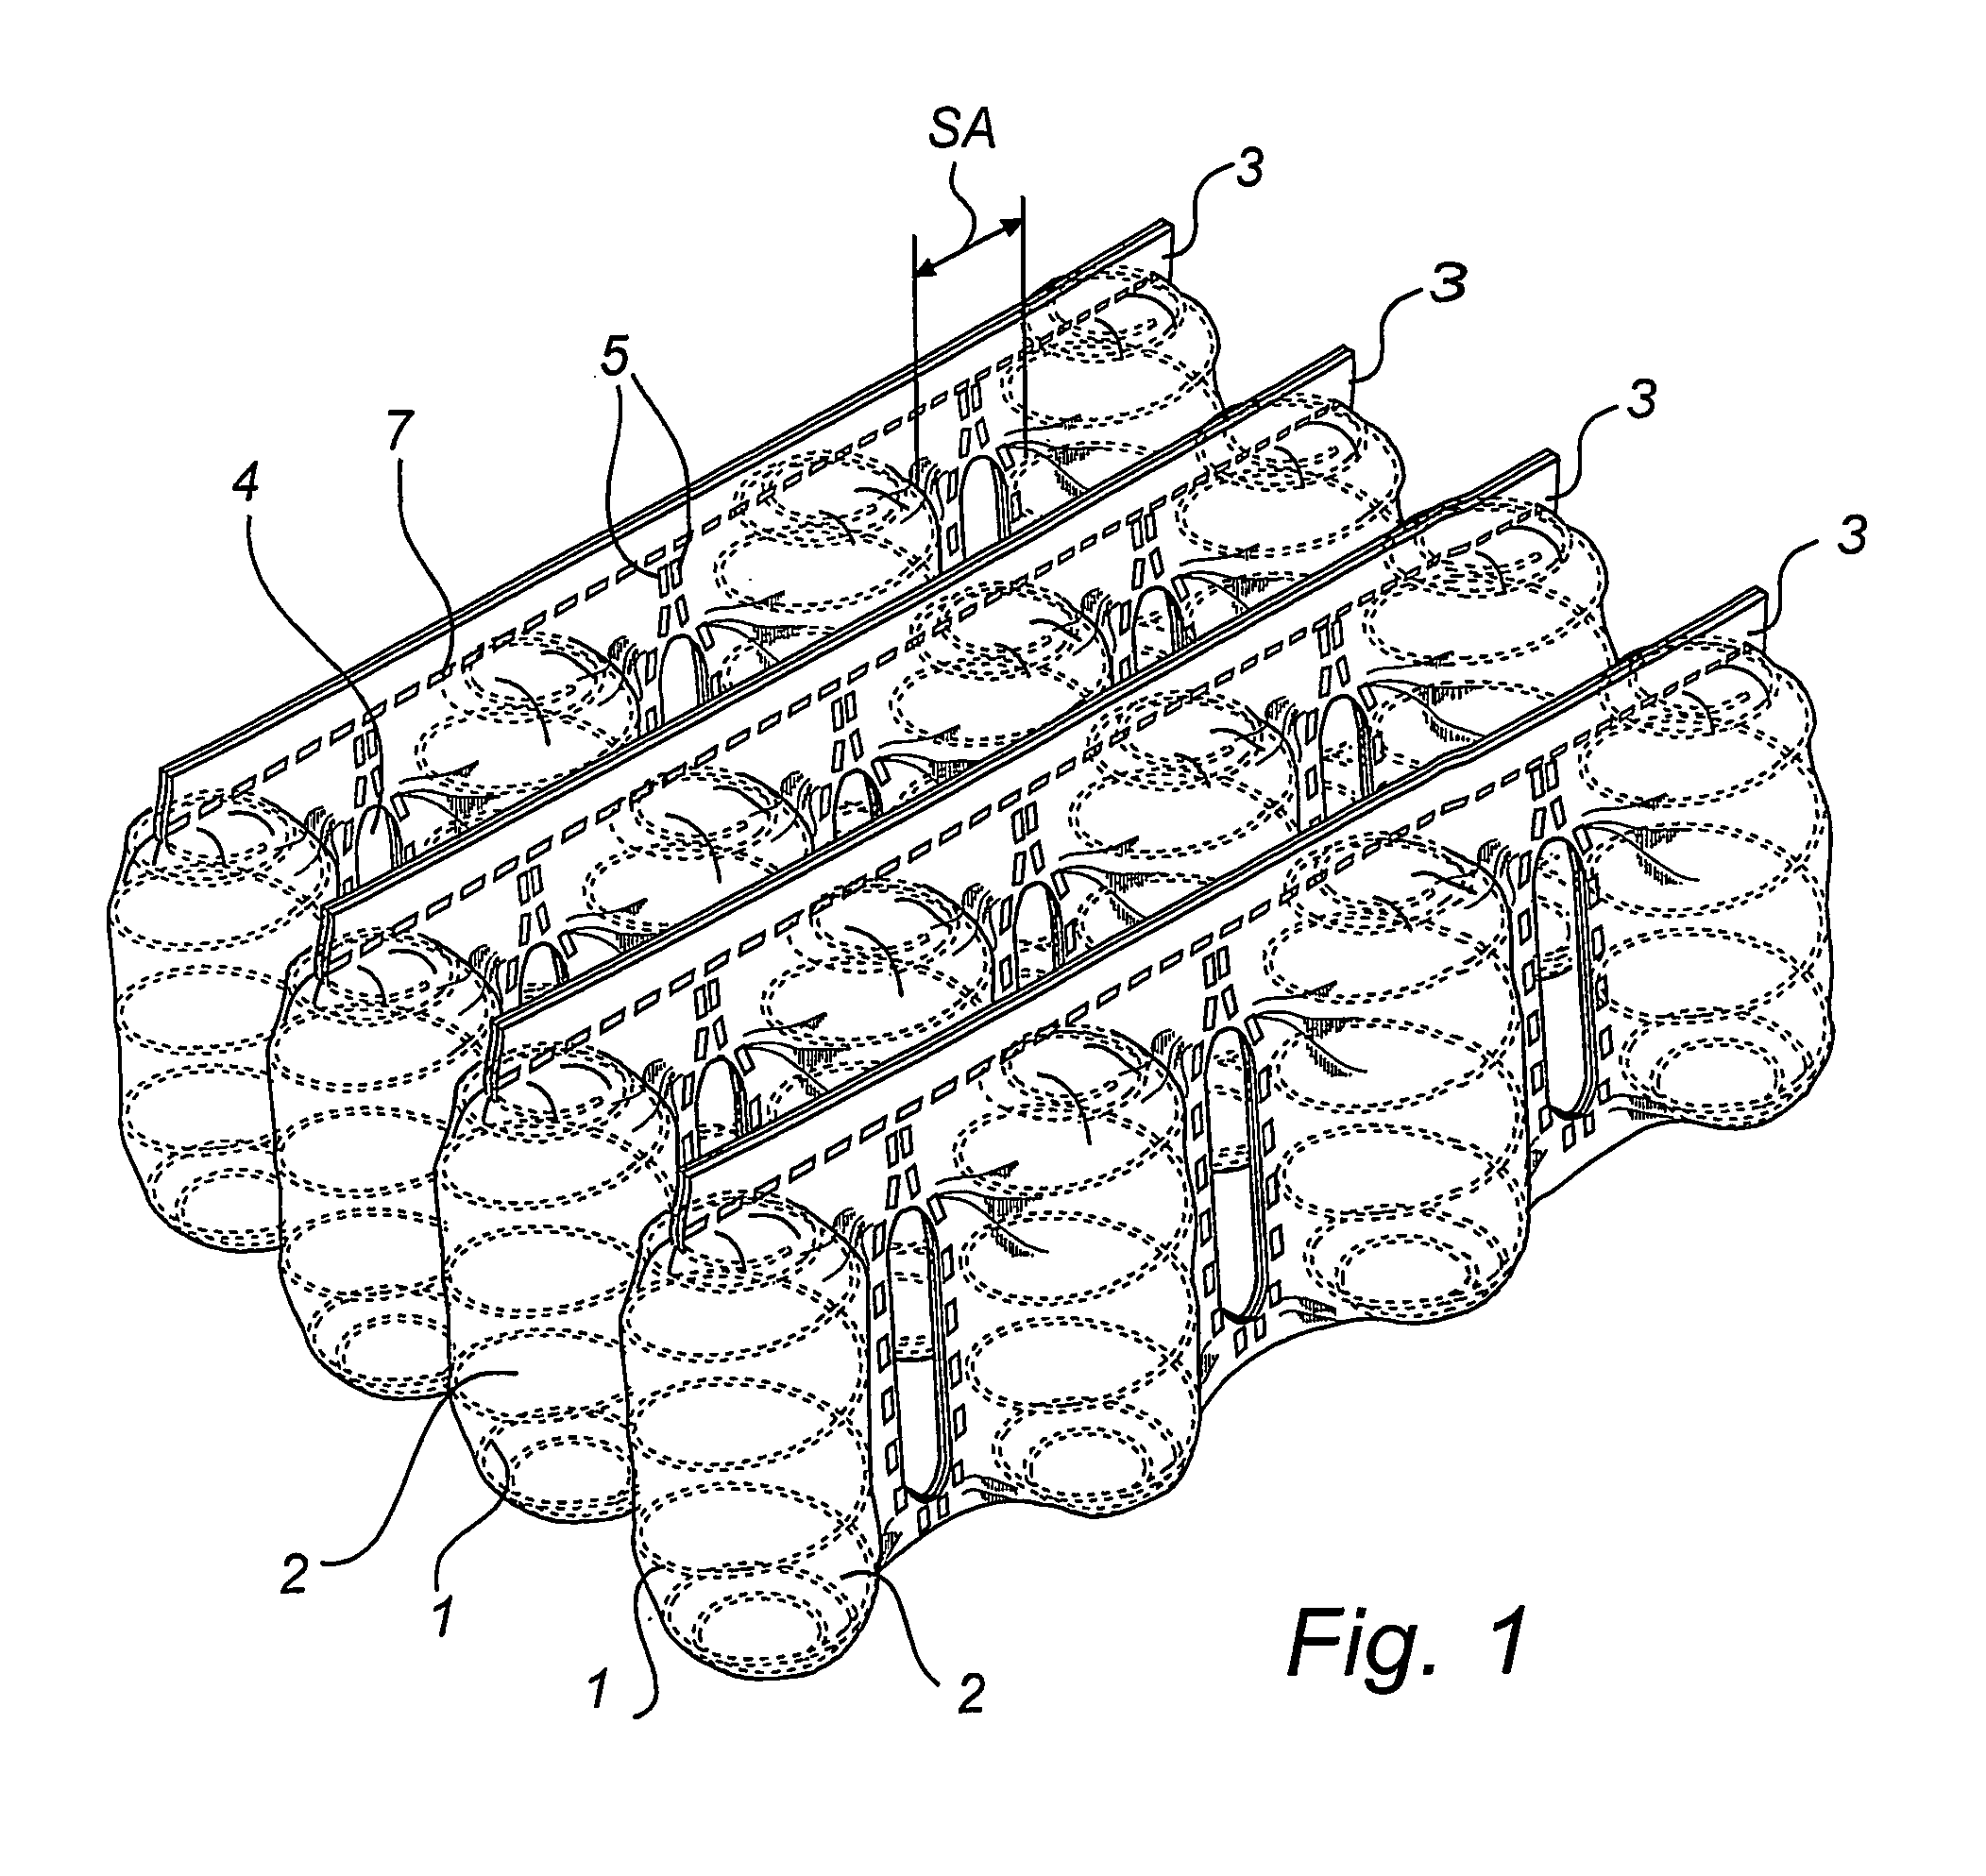 Separated pocket spring mattress with cut through string, and method and apparatus for production of such mattress